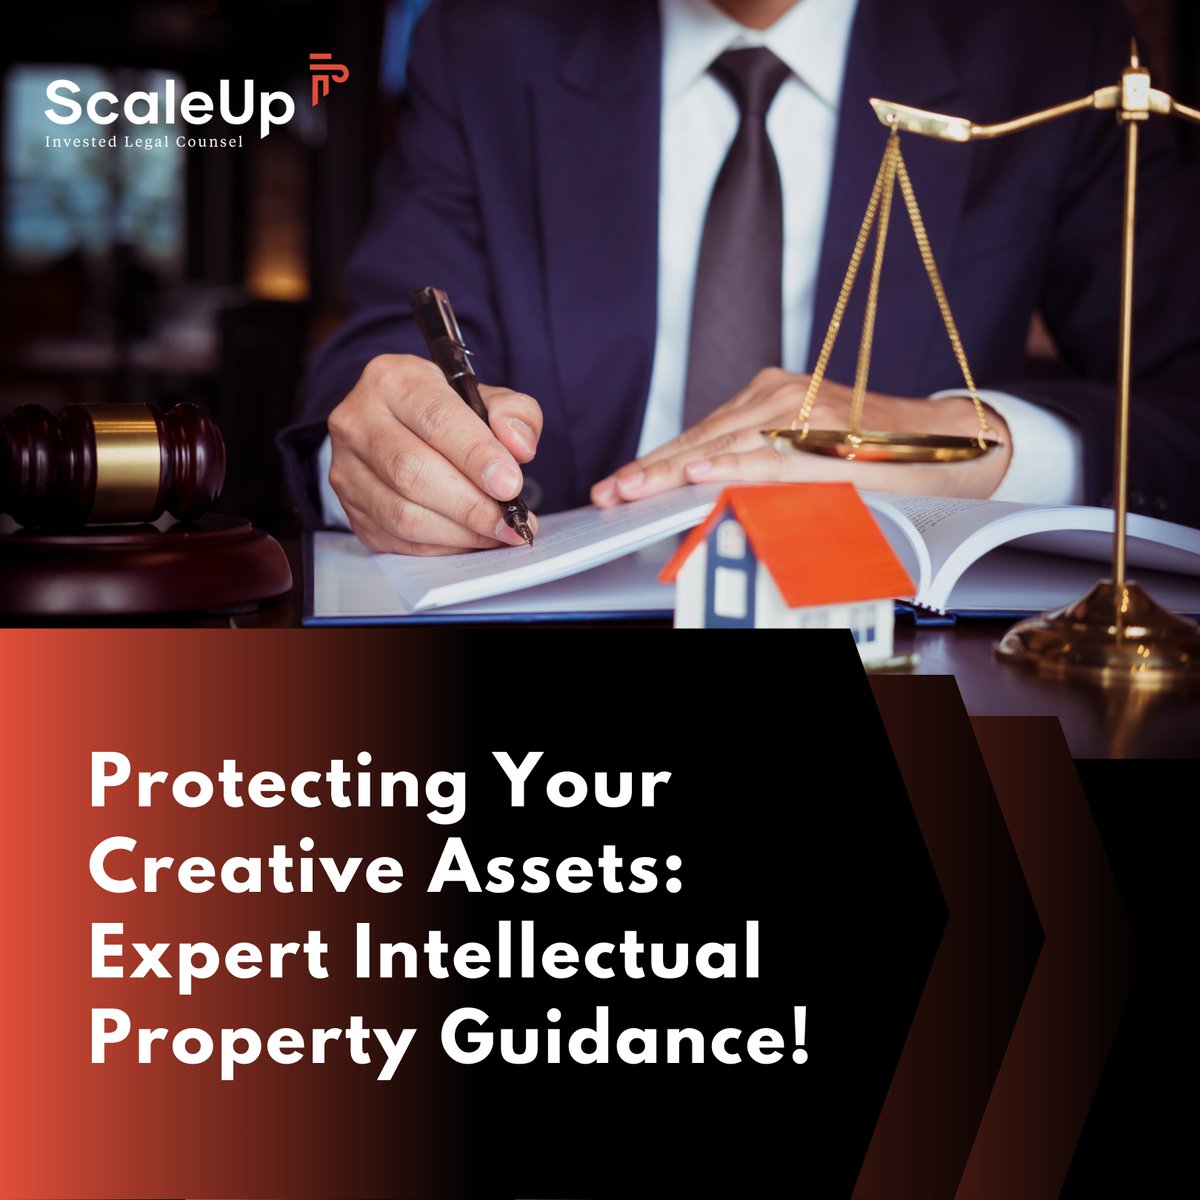 Just as a shield guards against threats, ScaleUp Legal shields your intellectual property. Let us navigate trademarks, copyrights, and patents to safeguard your innovations.

#IPProtection #InnovationsGuardian #ScaleUpLegal #SecureAssets #BusinessInnovations